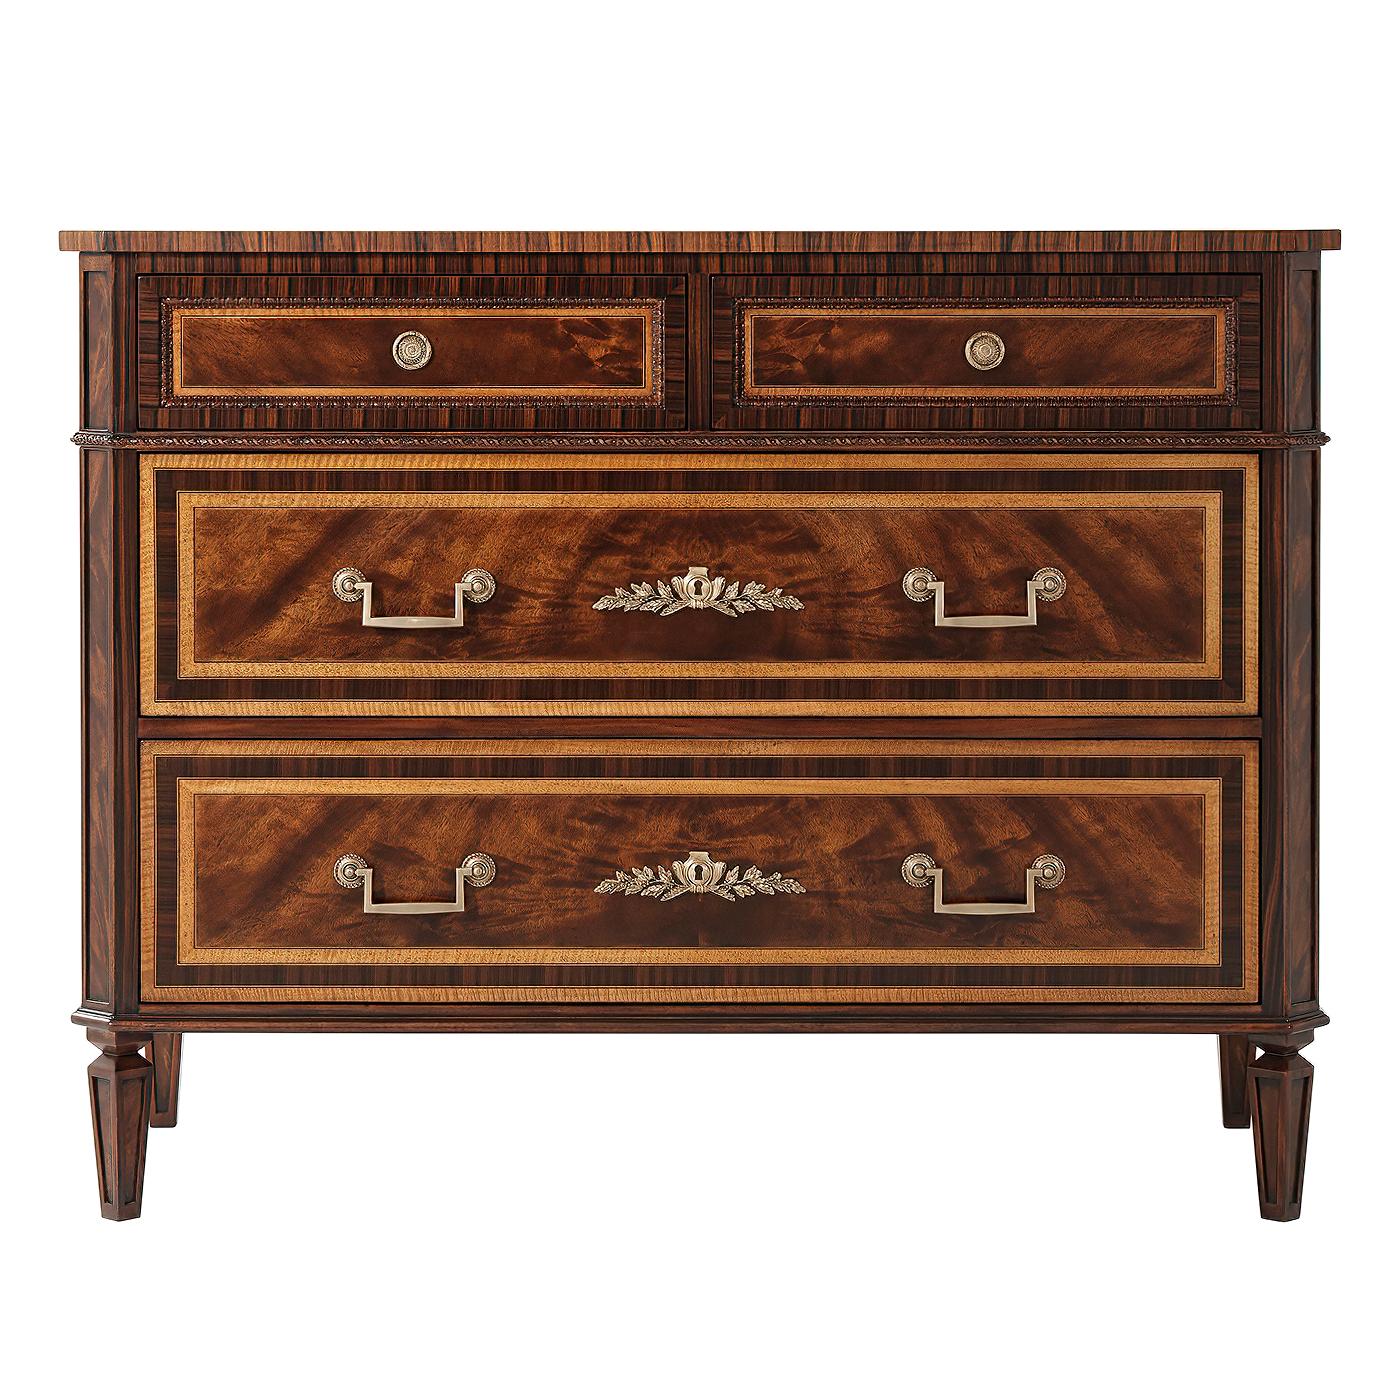 A flame mahogany, Movingue and rosewood banded chest of drawers, the rectangular top with canted corners, the two short drawers with lapette carved recessed molding, with a paper twist and rosette carved molding below with two further long drawers,